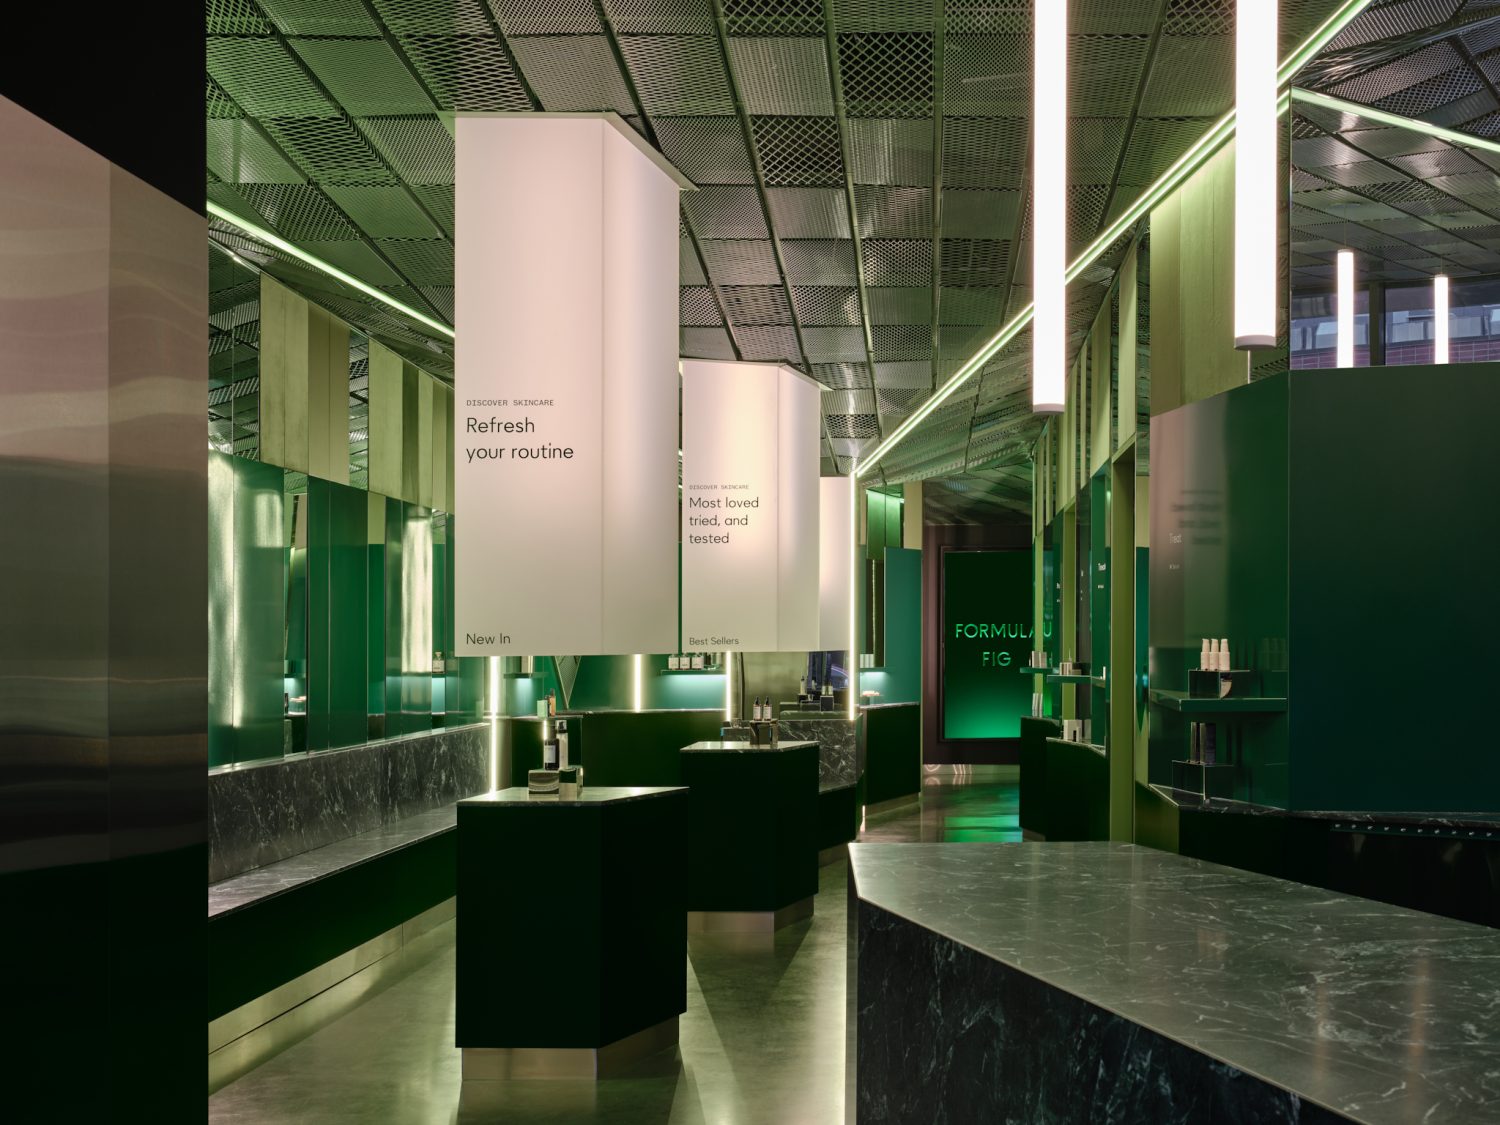 inside of bathroom, marble sink, green interior, light up lamps with words on them 